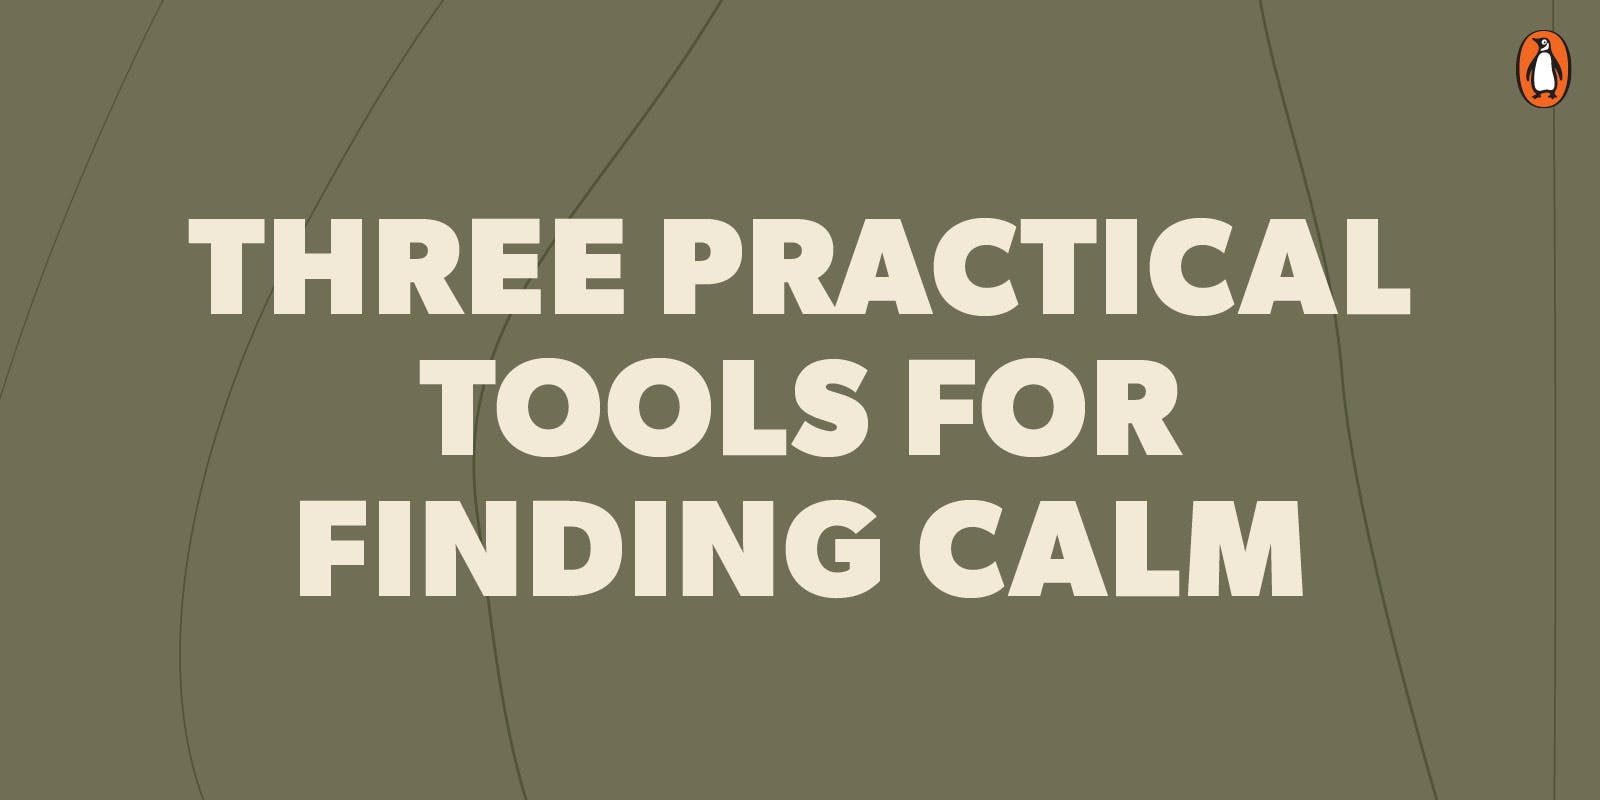 Three practical tools for finding calm